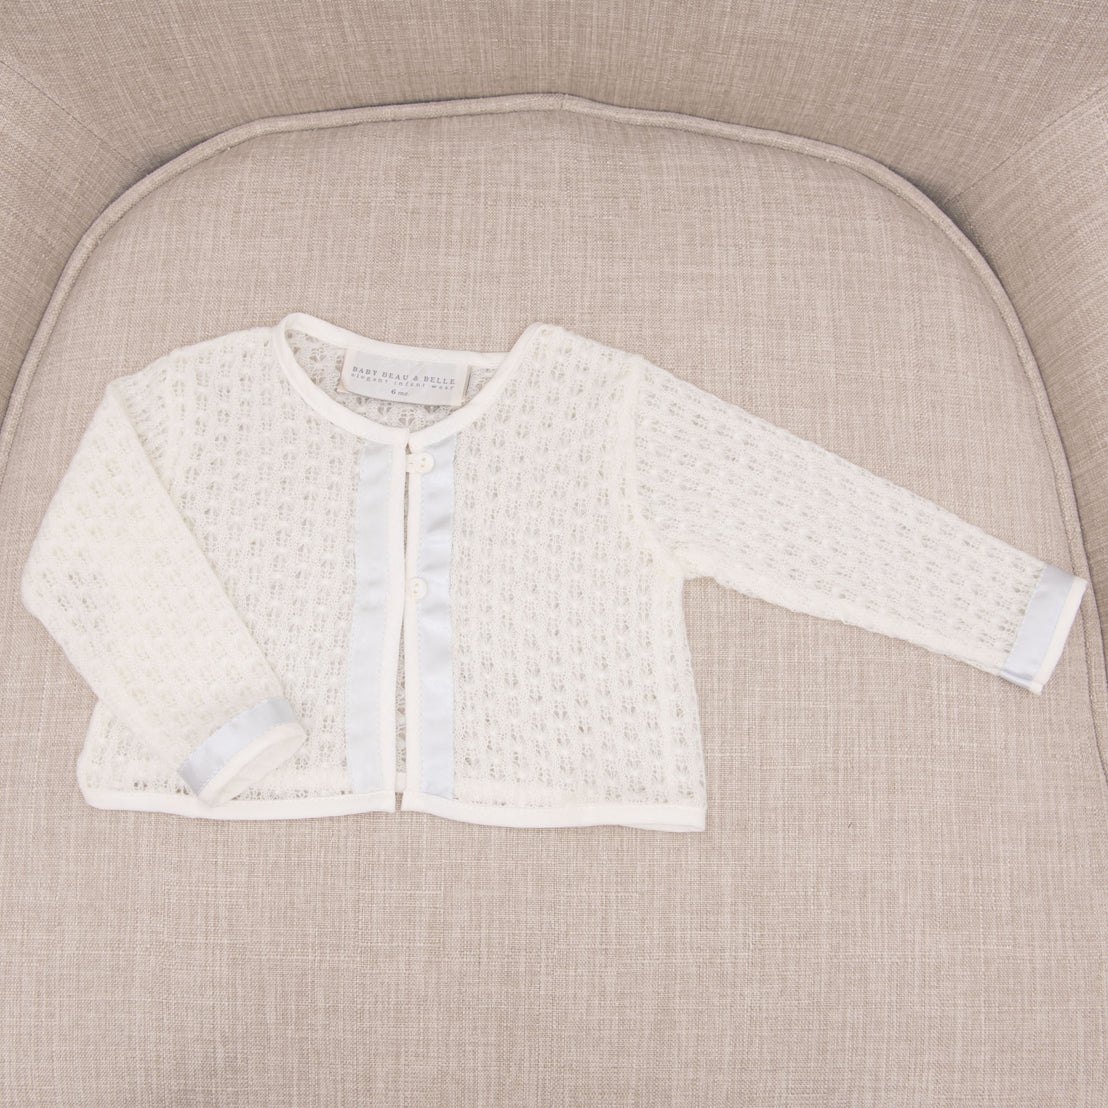 Flat lay photograph of a boys knit baptism sweater. 